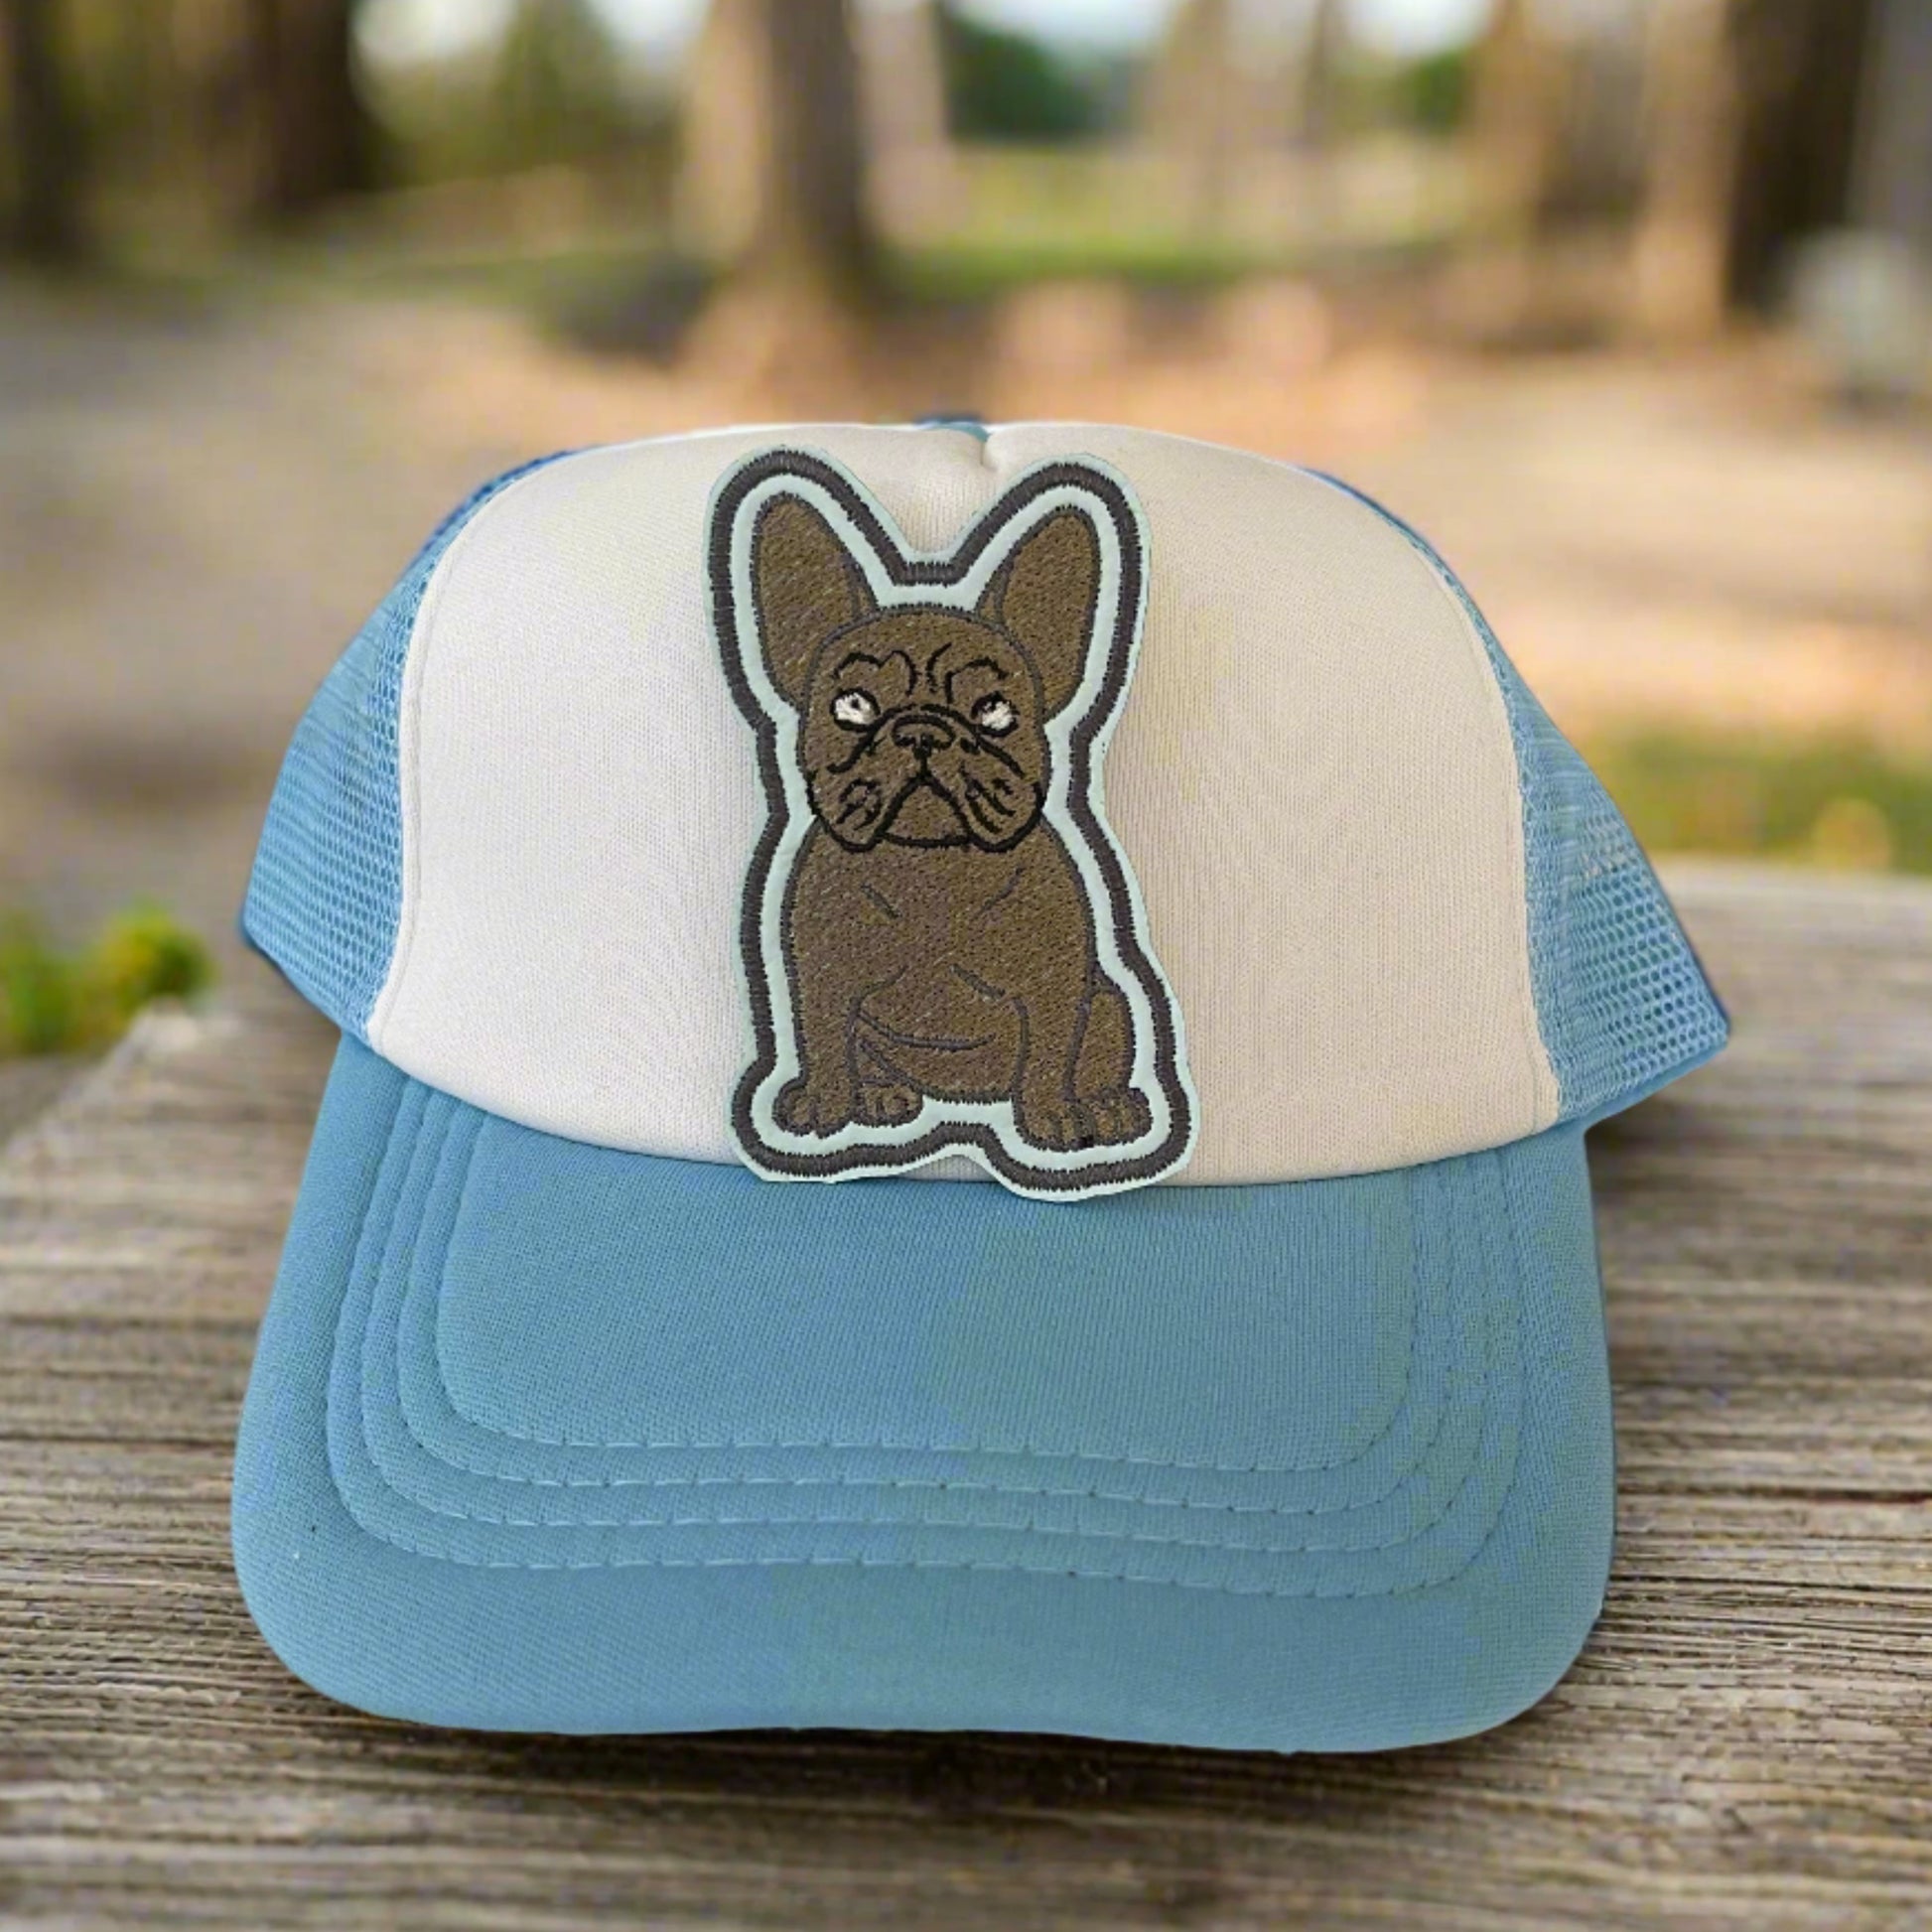 Iron-on patch featuring an adorable French Bulldog design, showcasing a stylish and fun aesthetic.